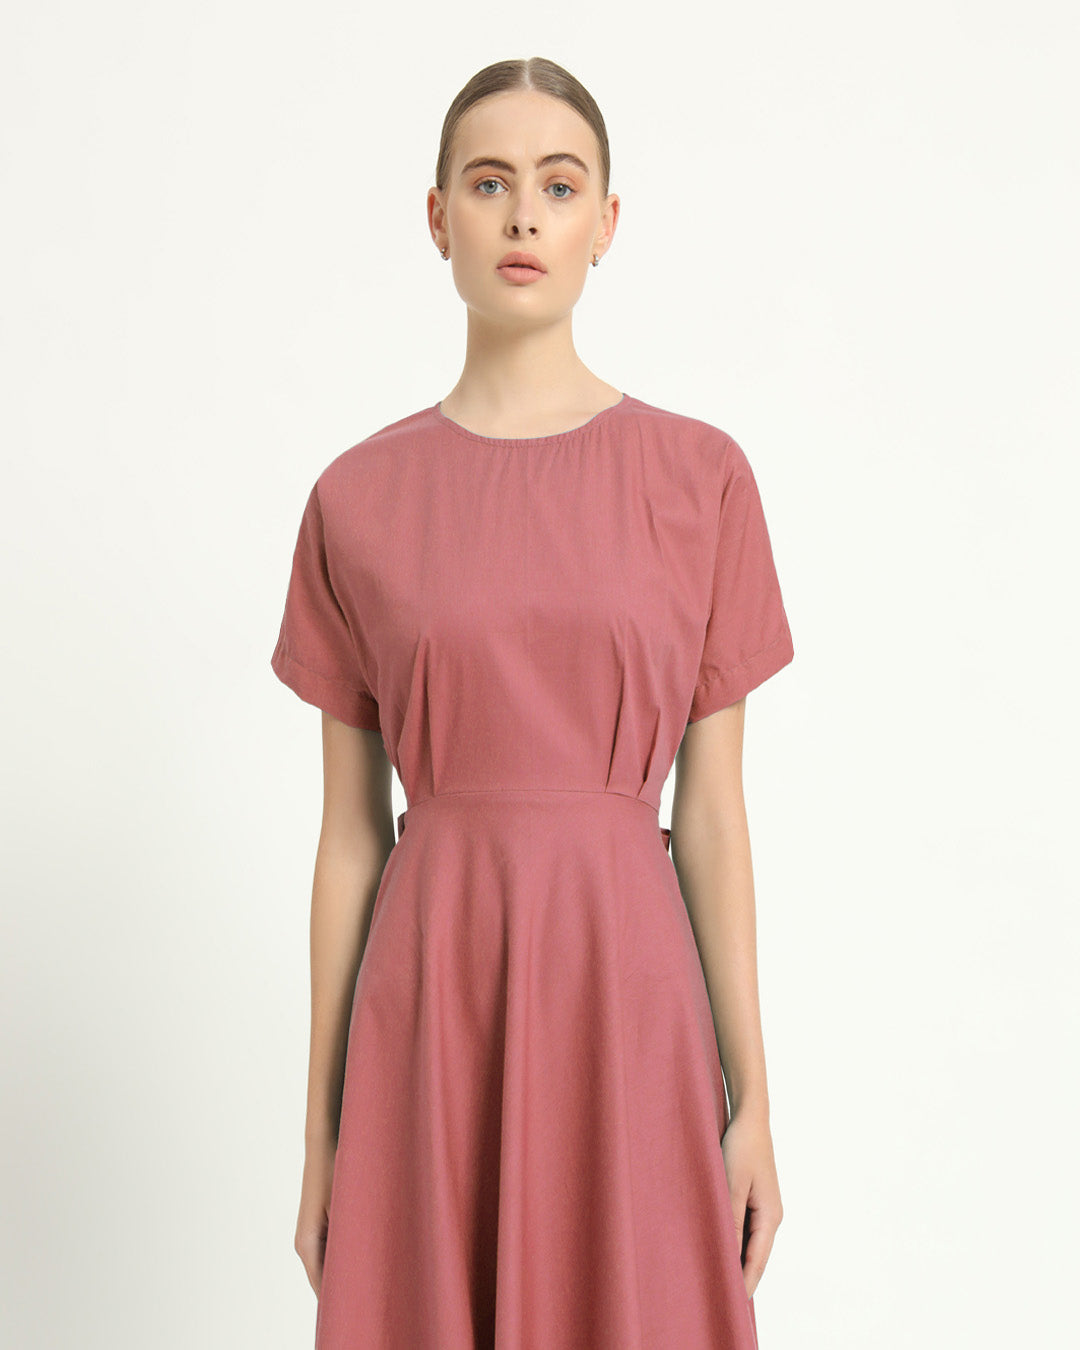 The Griffen Ivory Pink Cotton Dress